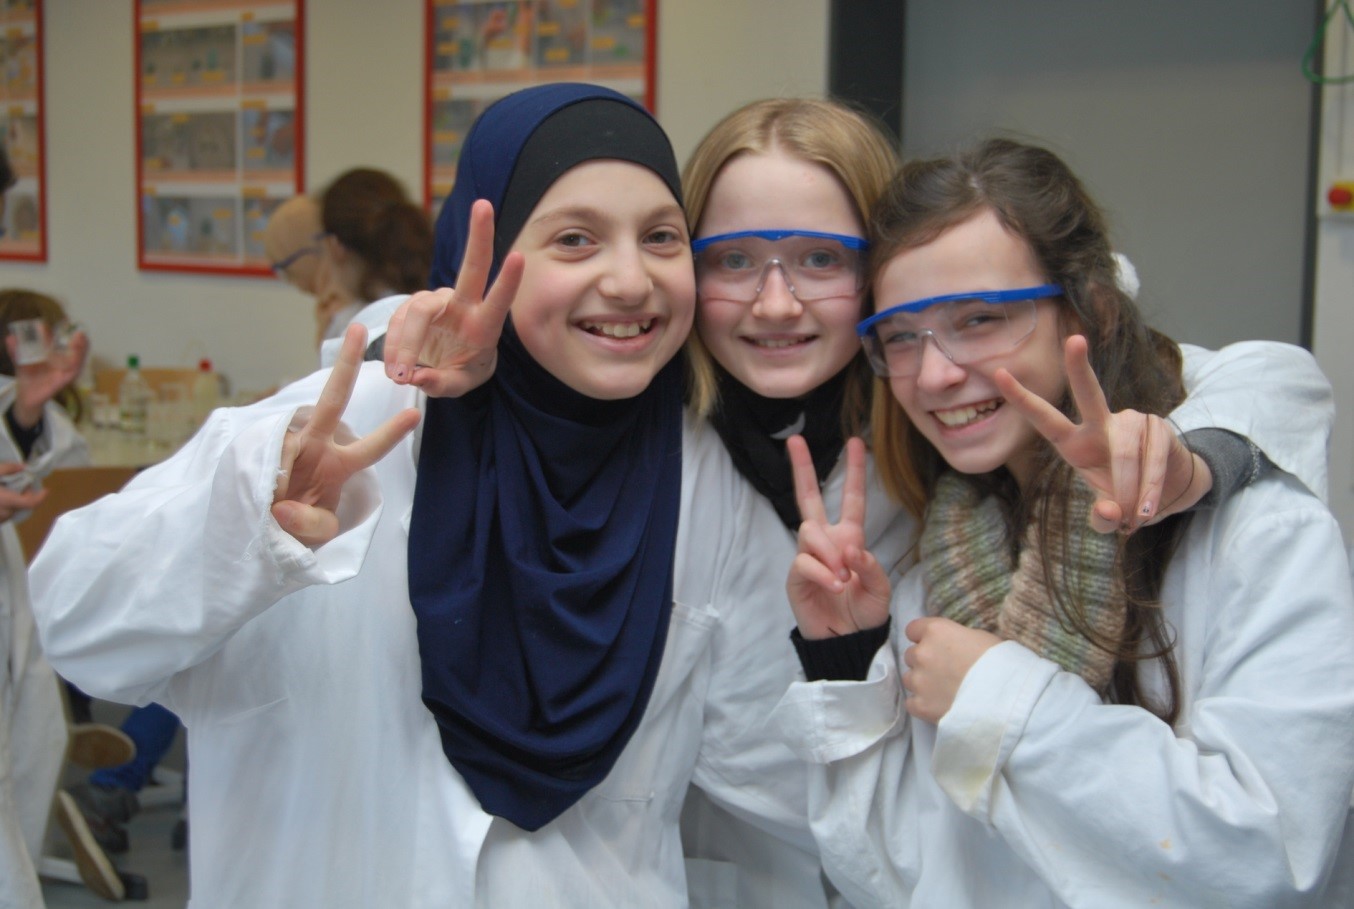 Three girls in lab coats show the victory sign.